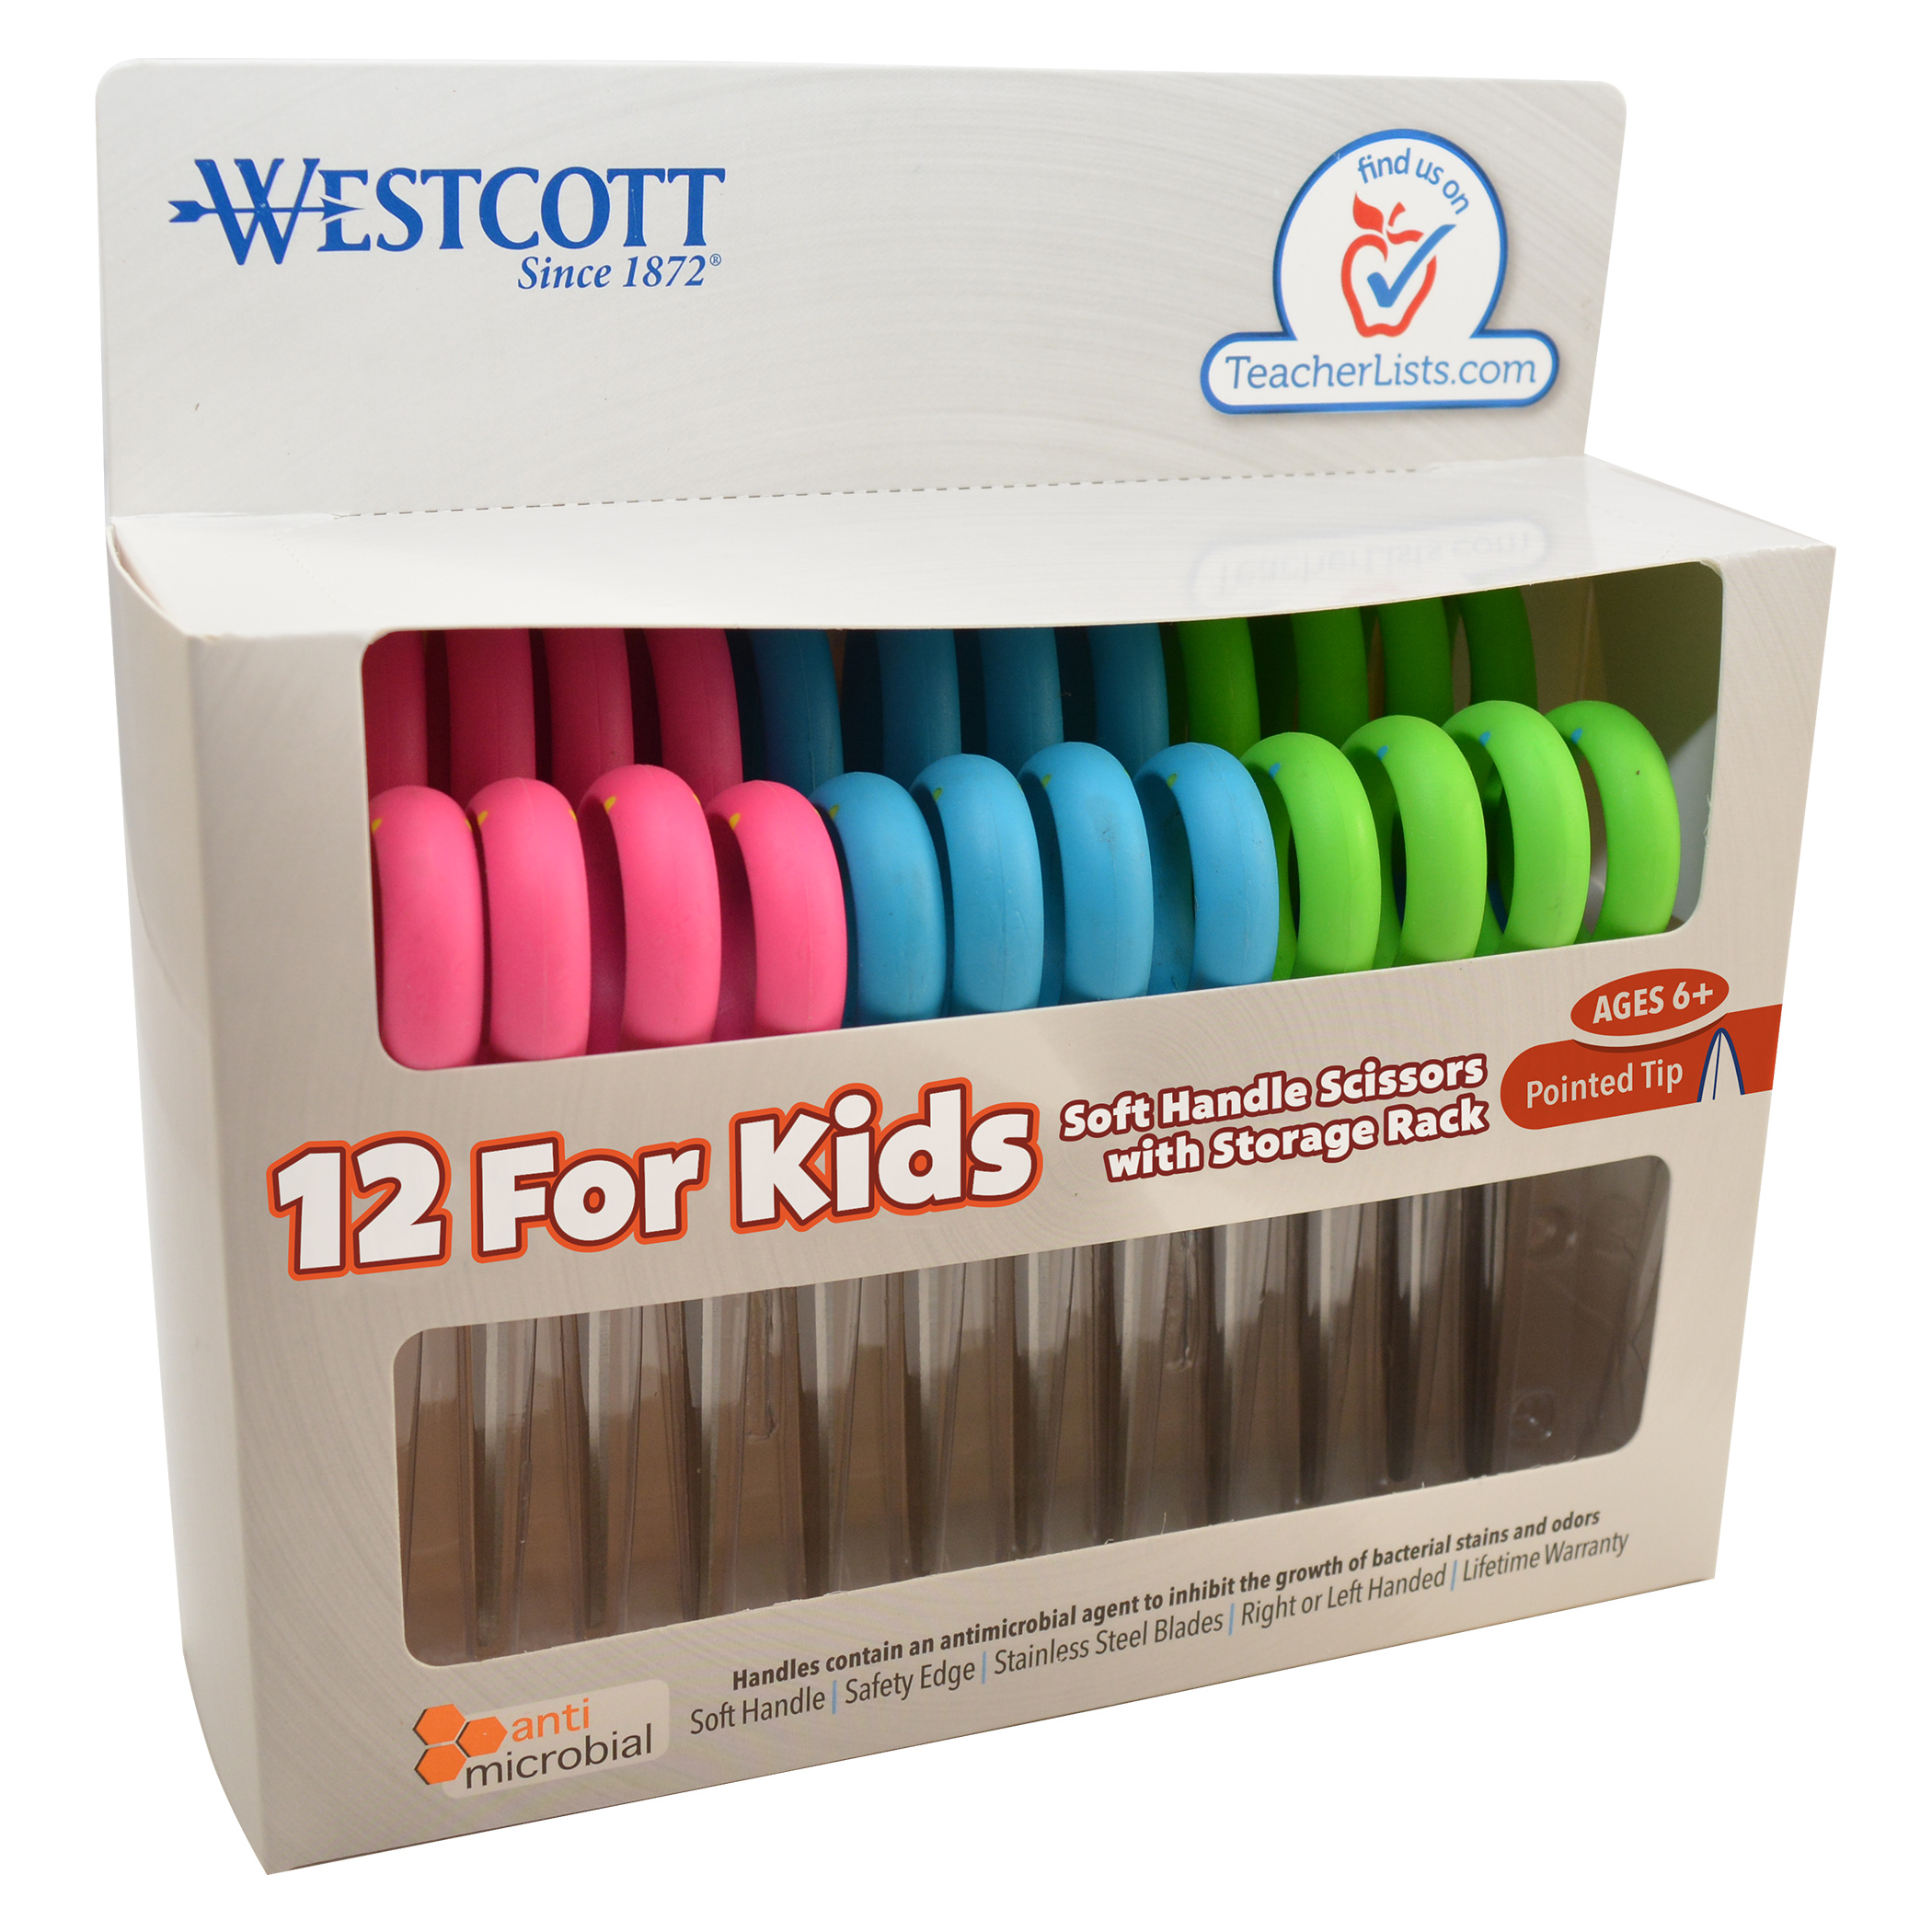 Westcott Soft Handle Kids Scissors with Anti-microbial Protection, Assorted Colors, 5-Inch Pointed, 12 Pack (14874)